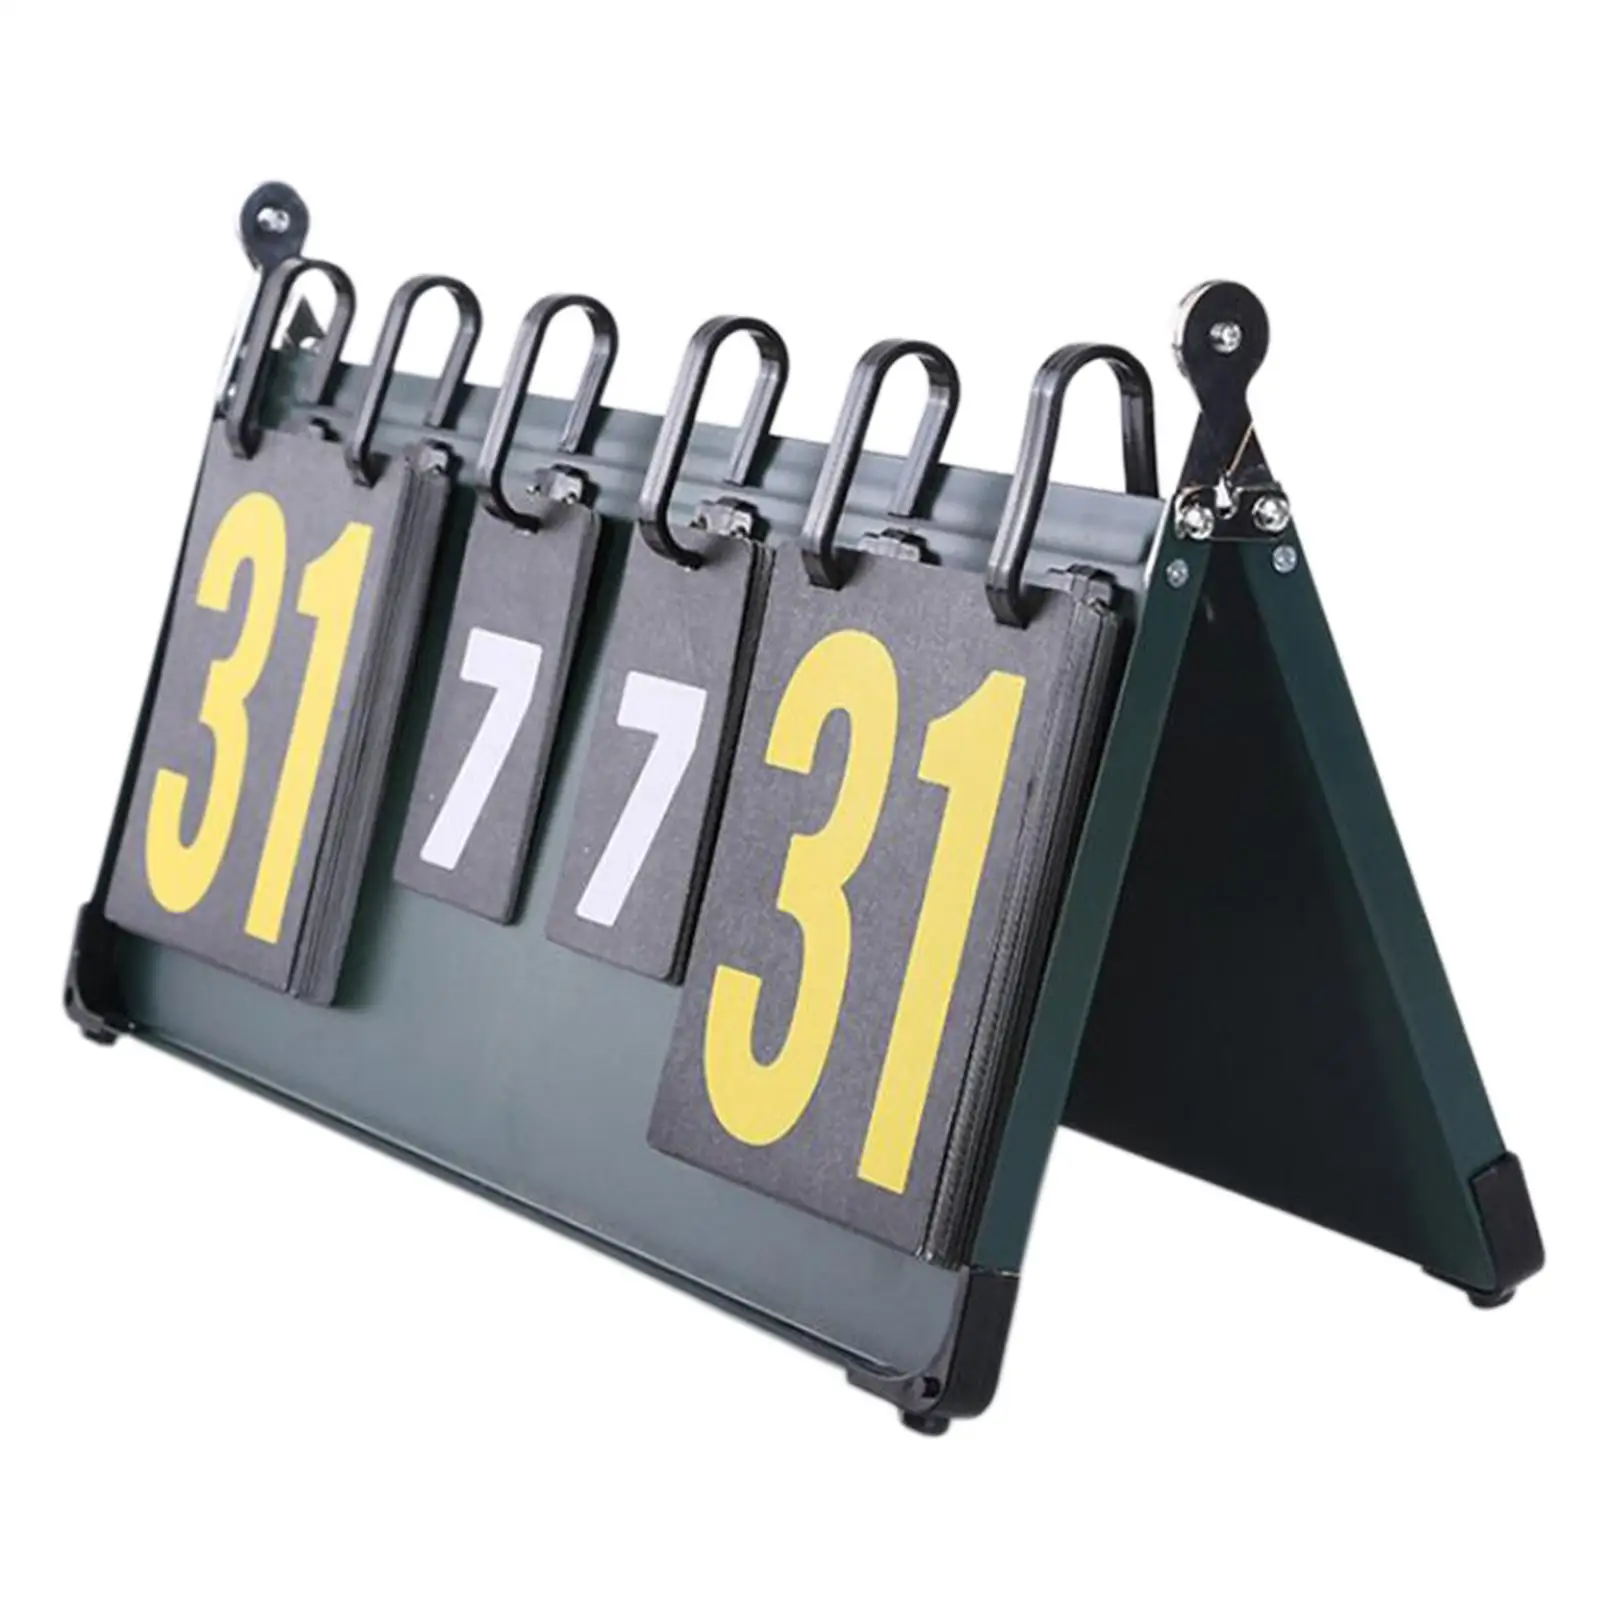 Portable Table Scoreboard Score Keeper for Basketball Indoor Sports